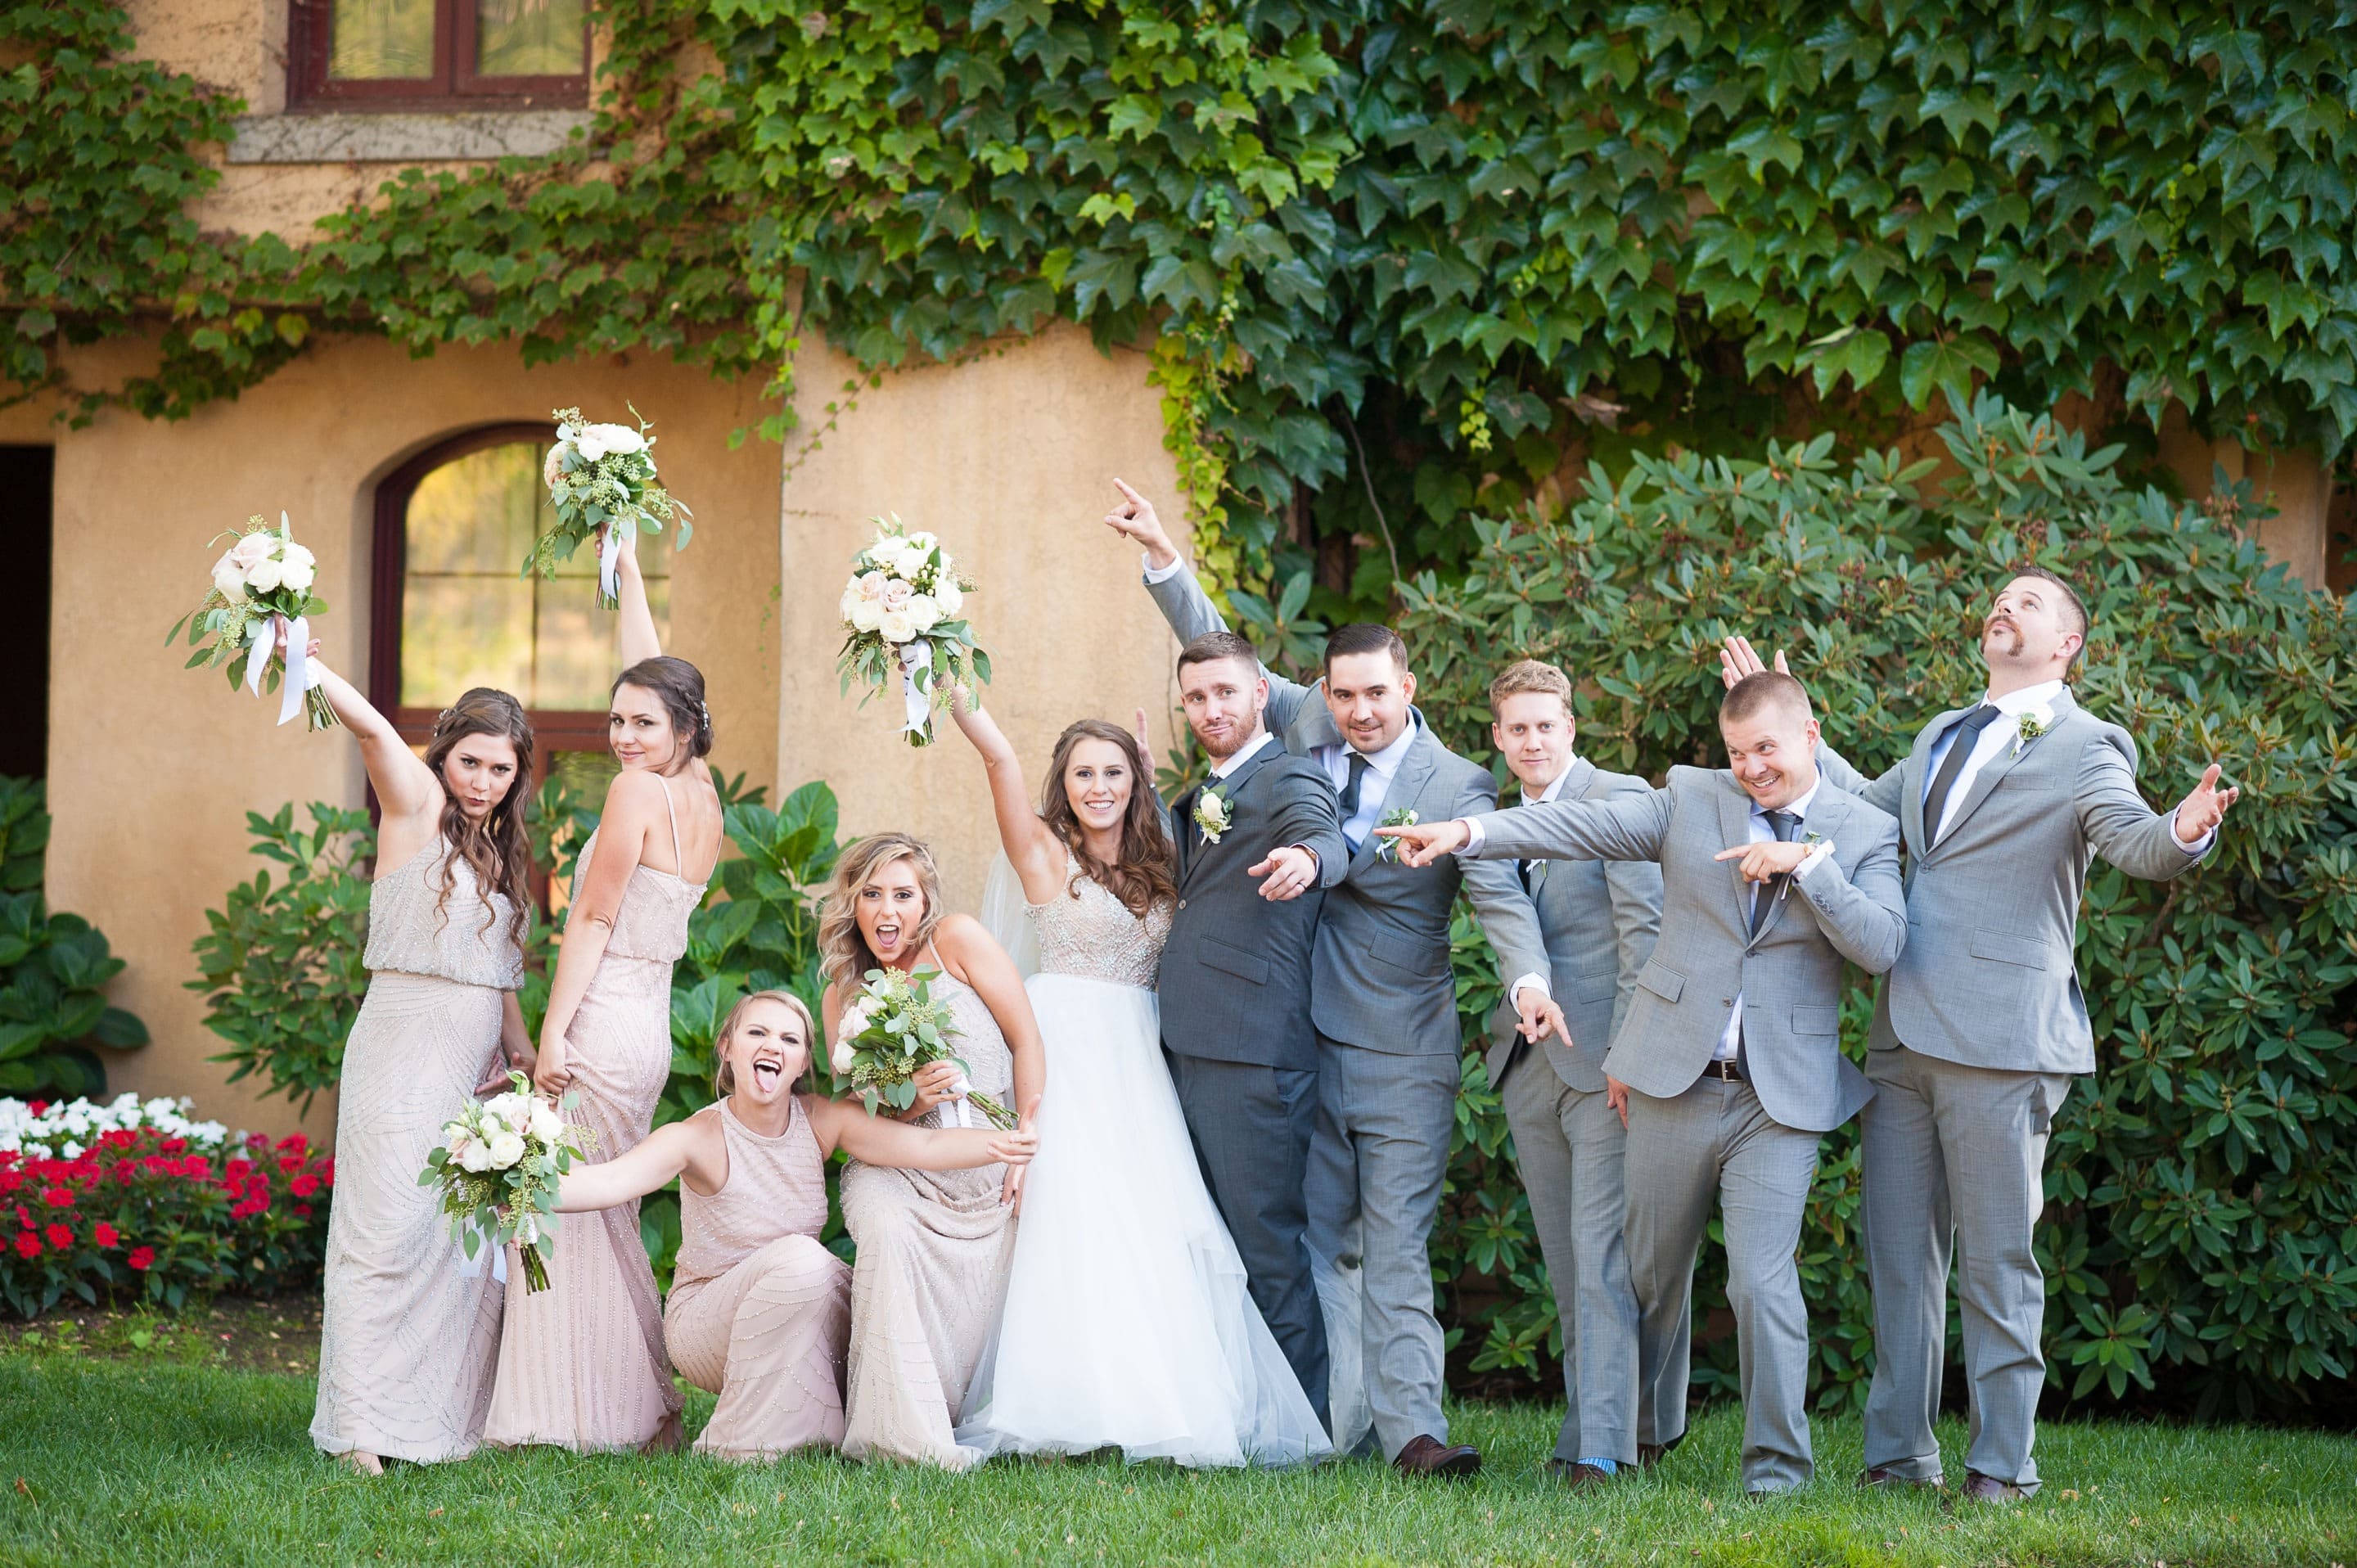 A wedding party celebrates at a customized, all-inclusive California wedding planned by Blissful Events.